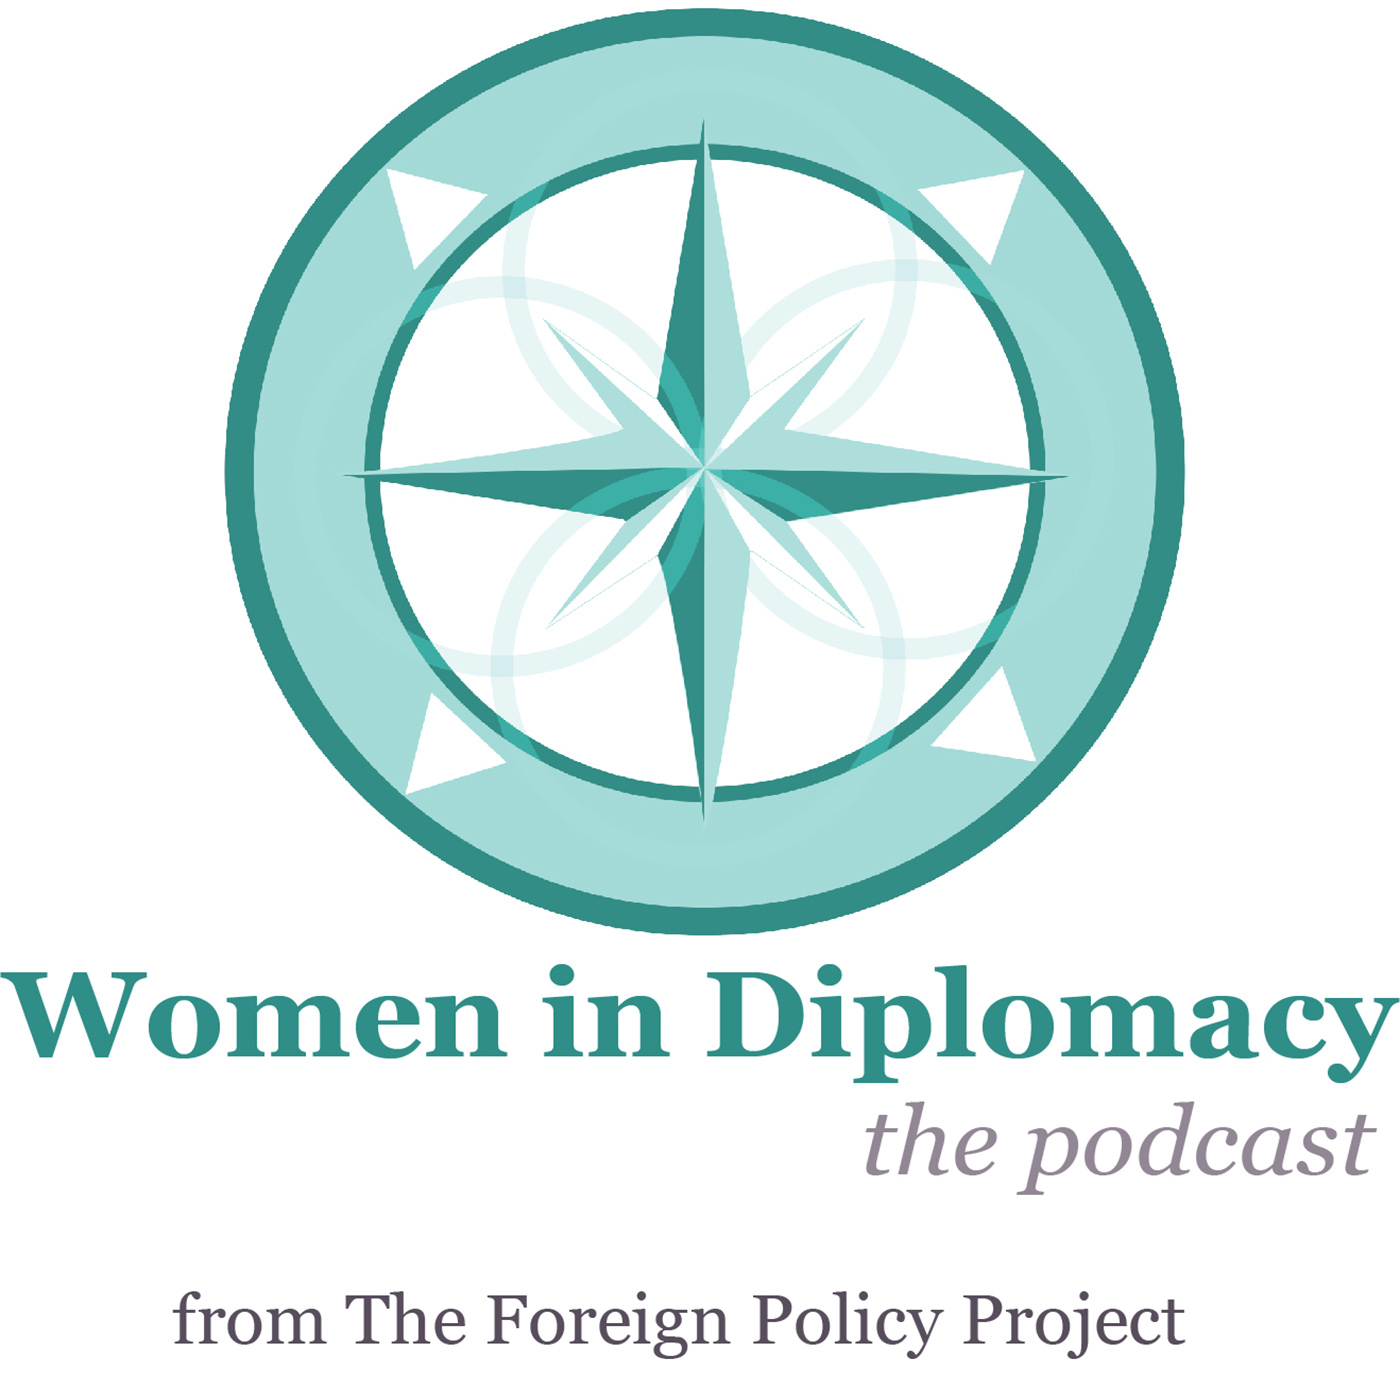 Why do we need a Women in Diplomacy Podcast?